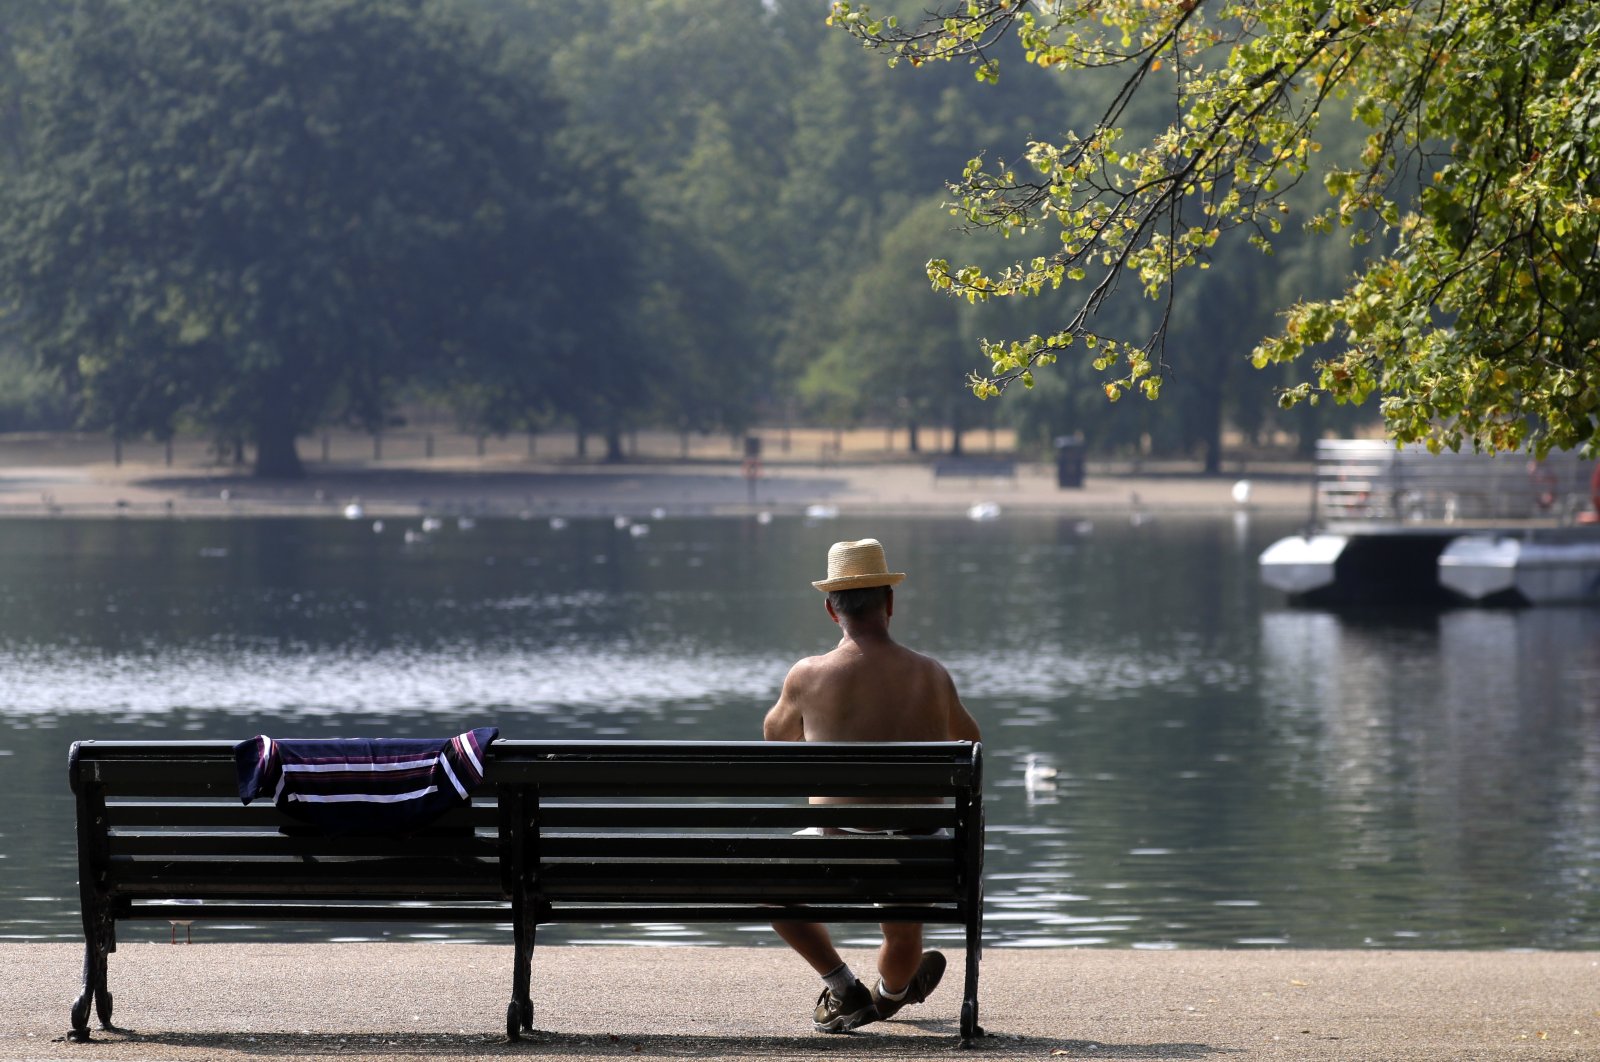 A man sits on a bench at The Serpentine in Hyde Park in London, Britain, Aug. 12, 2020. (AP Photo)